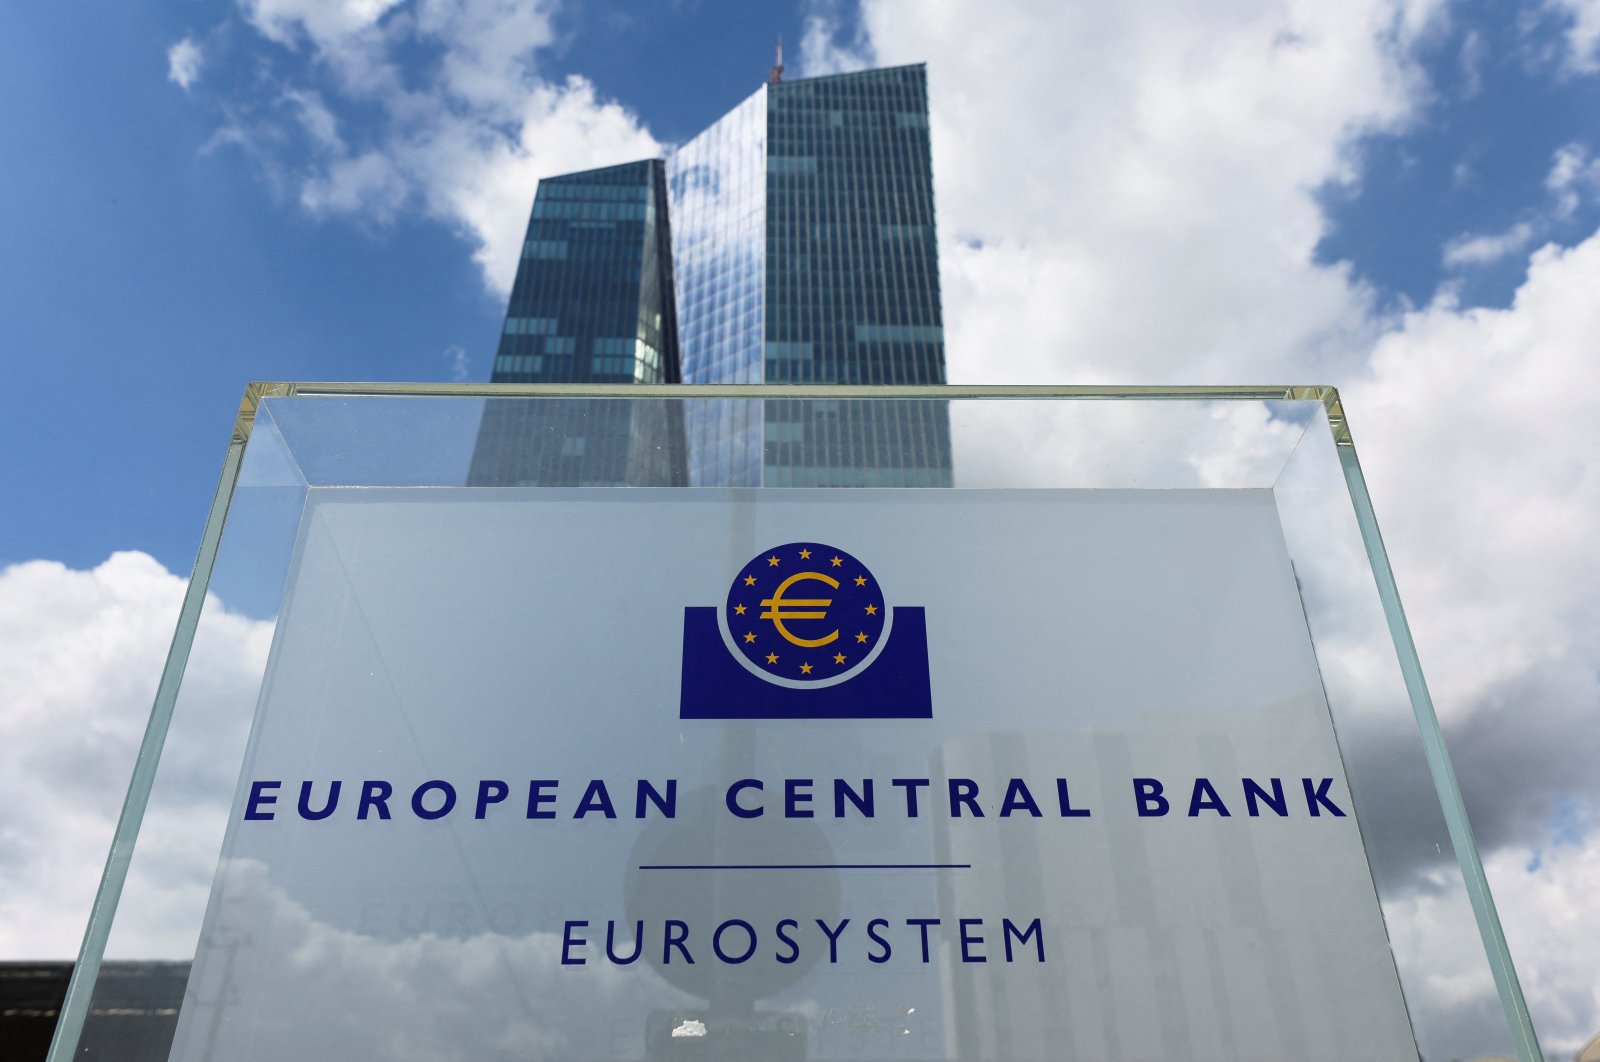 Signage is seen outside the European Central Bank (ECB) building, in Frankfurt, Germany, July 21, 2022. (Reuters Photo)